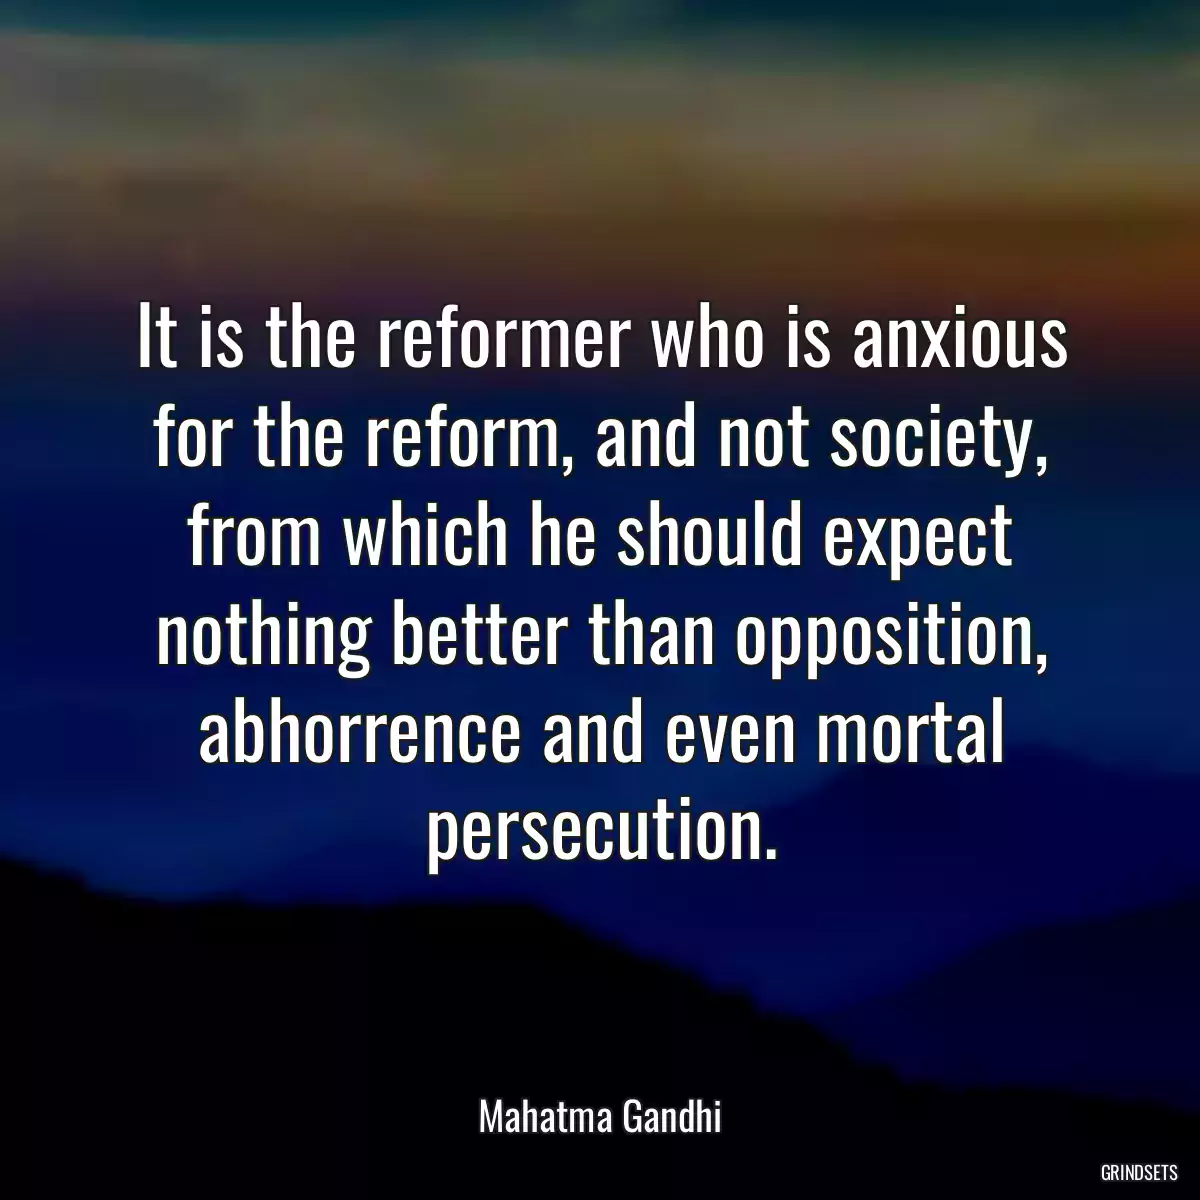 It is the reformer who is anxious for the reform, and not society, from which he should expect nothing better than opposition, abhorrence and even mortal persecution.